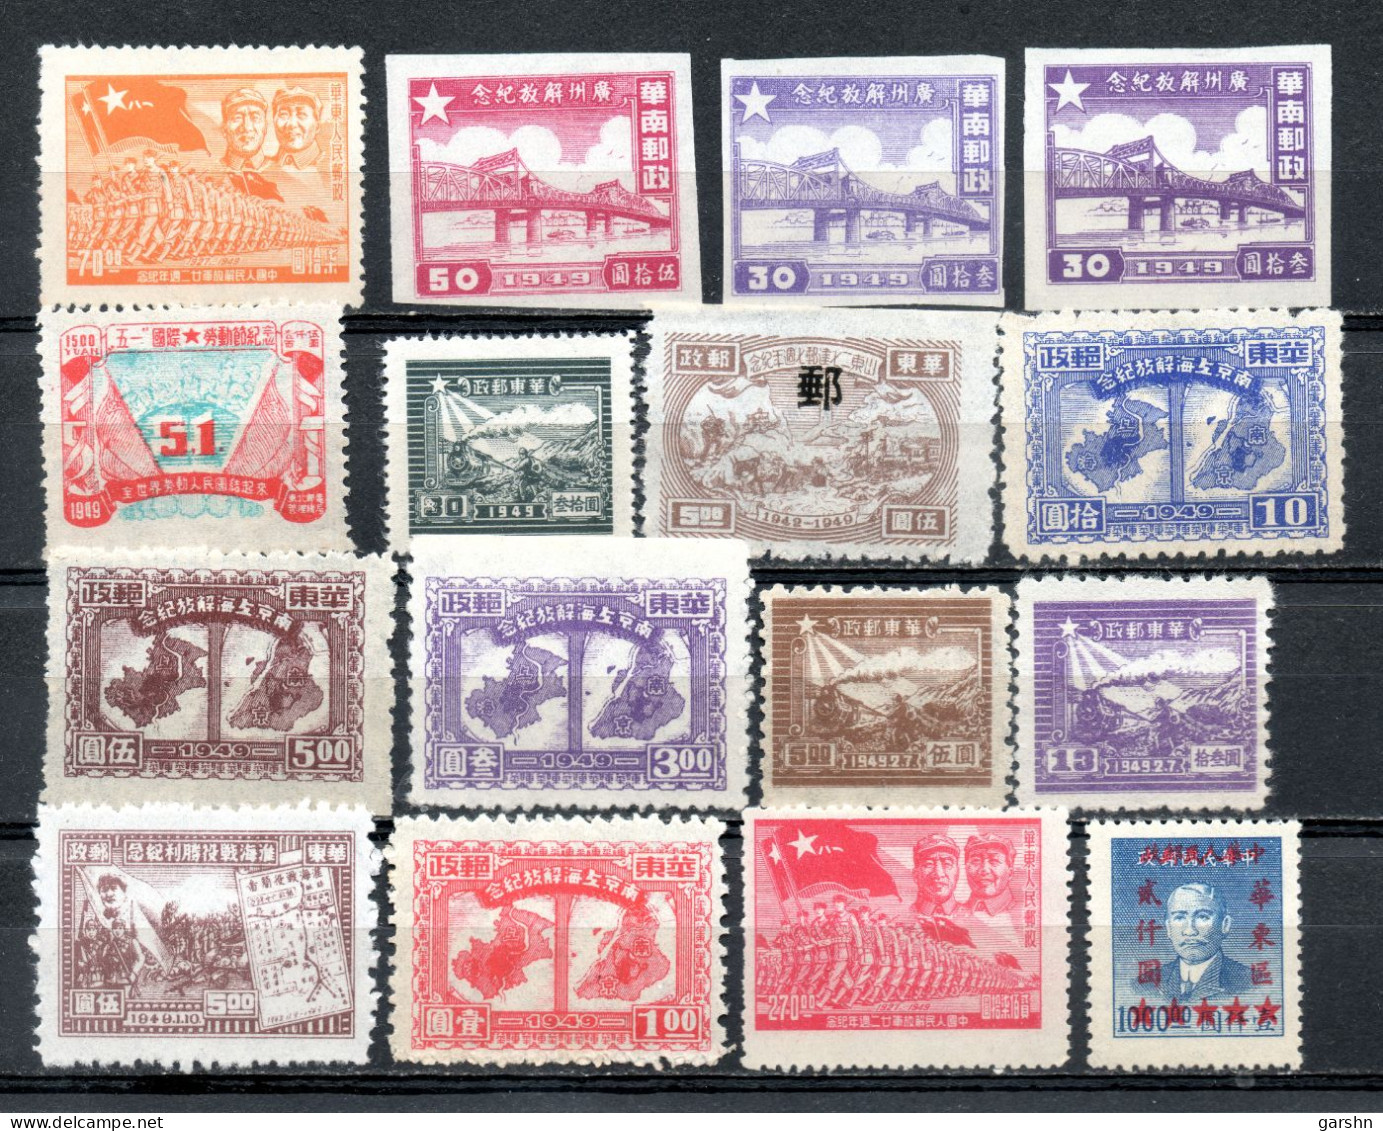 China Chine : (1 )  Lot De Timbres Chine Communiste - Western-China 1949-50